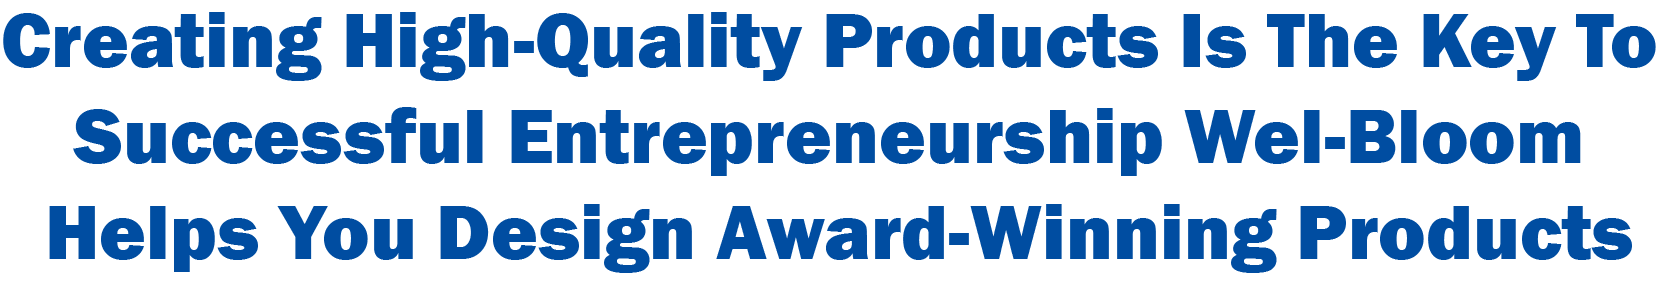 Creating High-Quality Products Is The Key To Successful Entrepreneurship   Wel-Bloom Helps You Design Award-Winning Products   